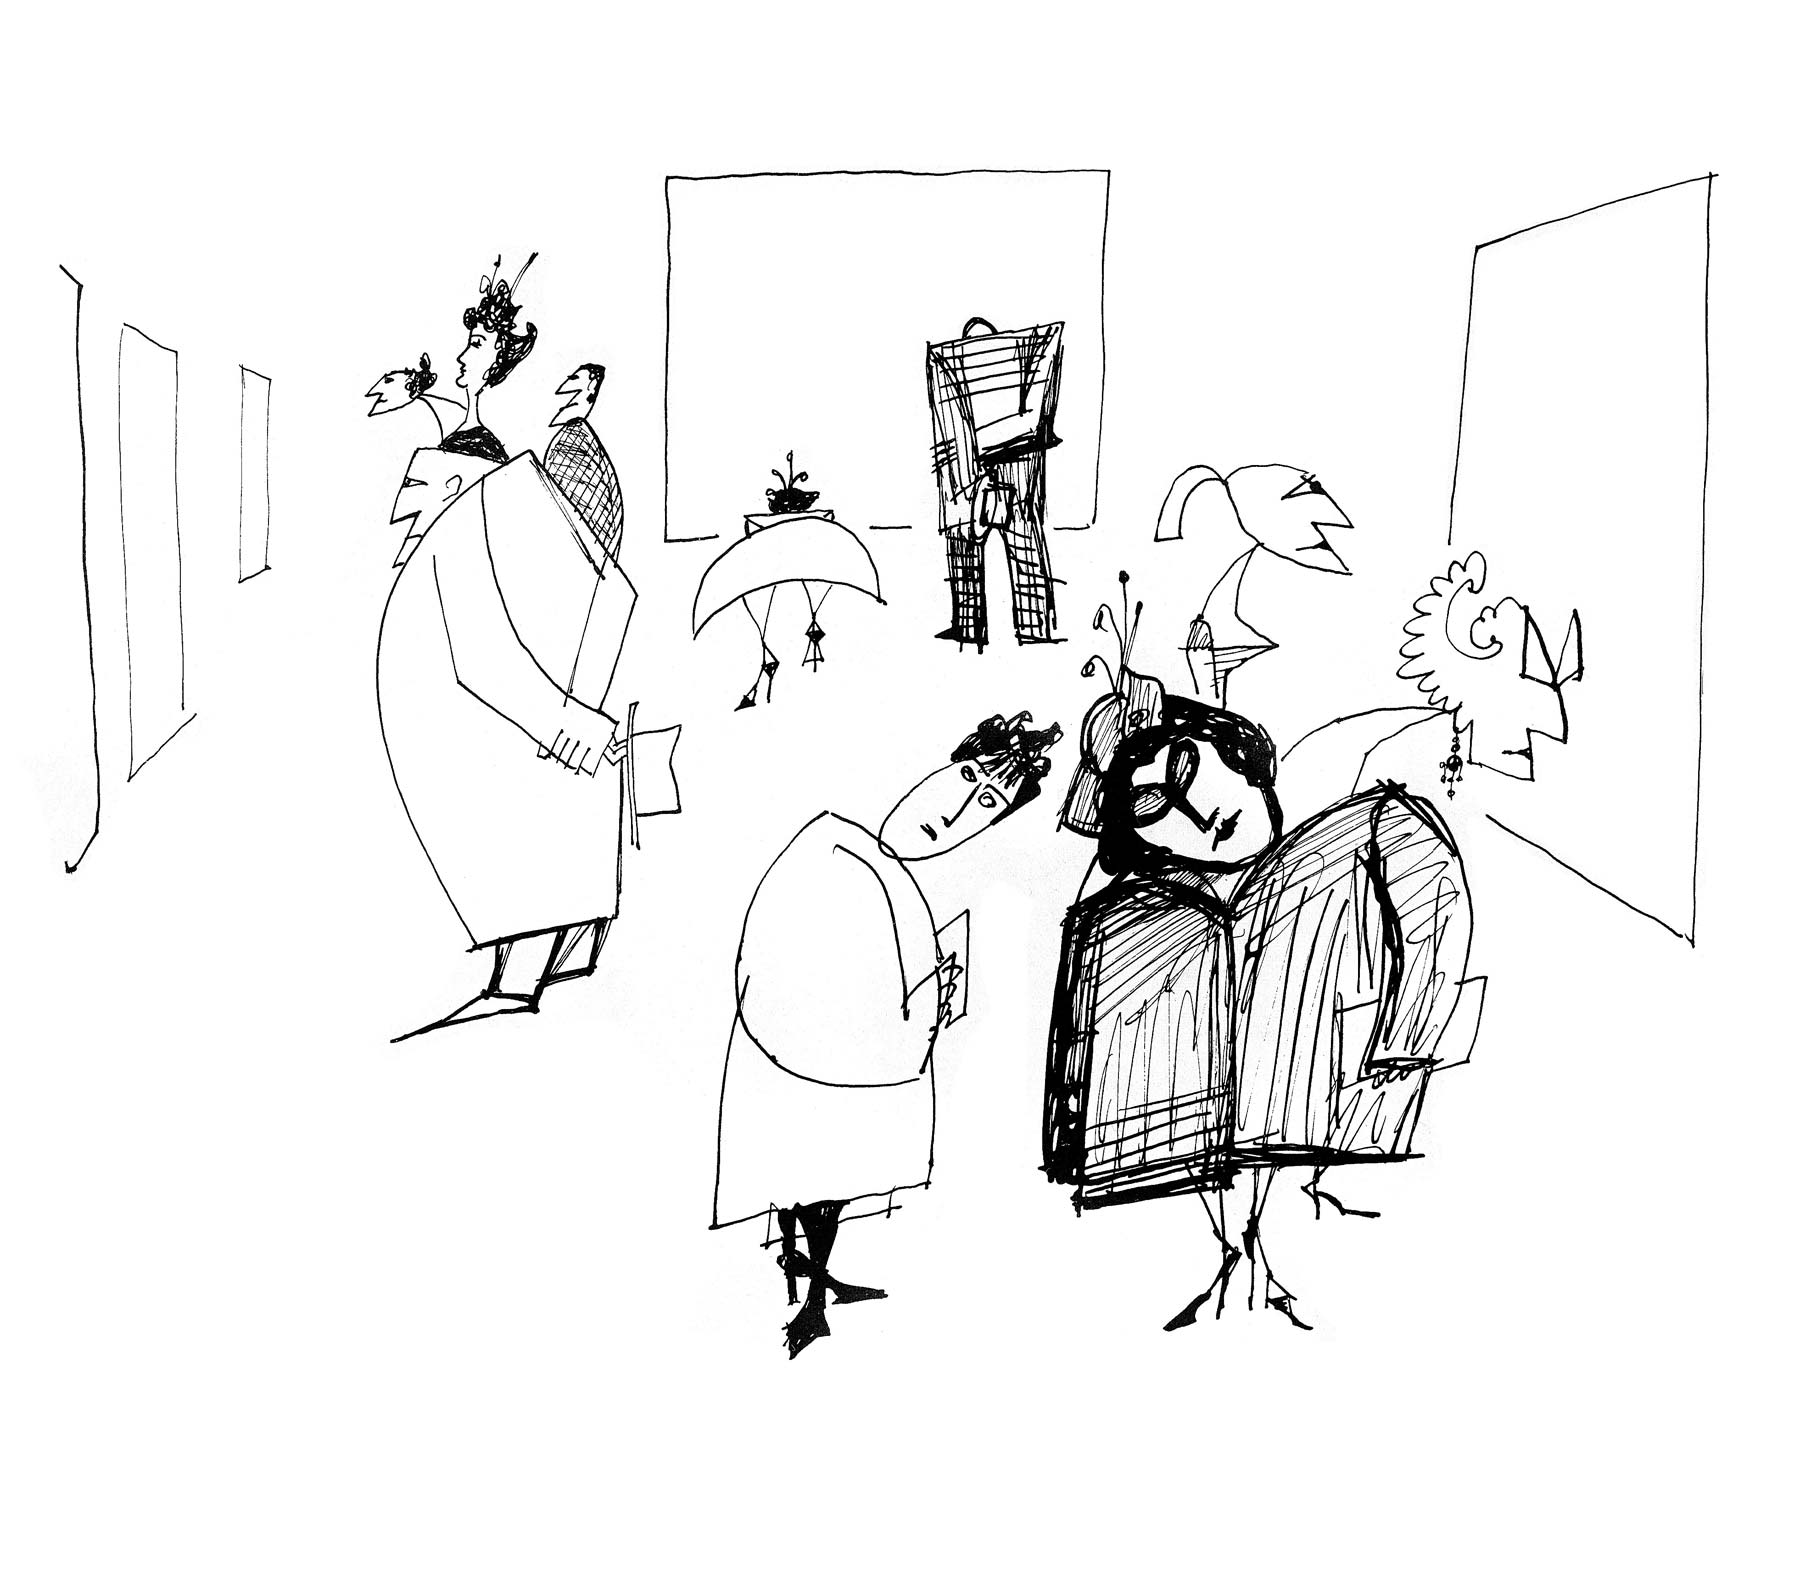 Drawing in <em>The New Yorker</em>, March 8, 1958.